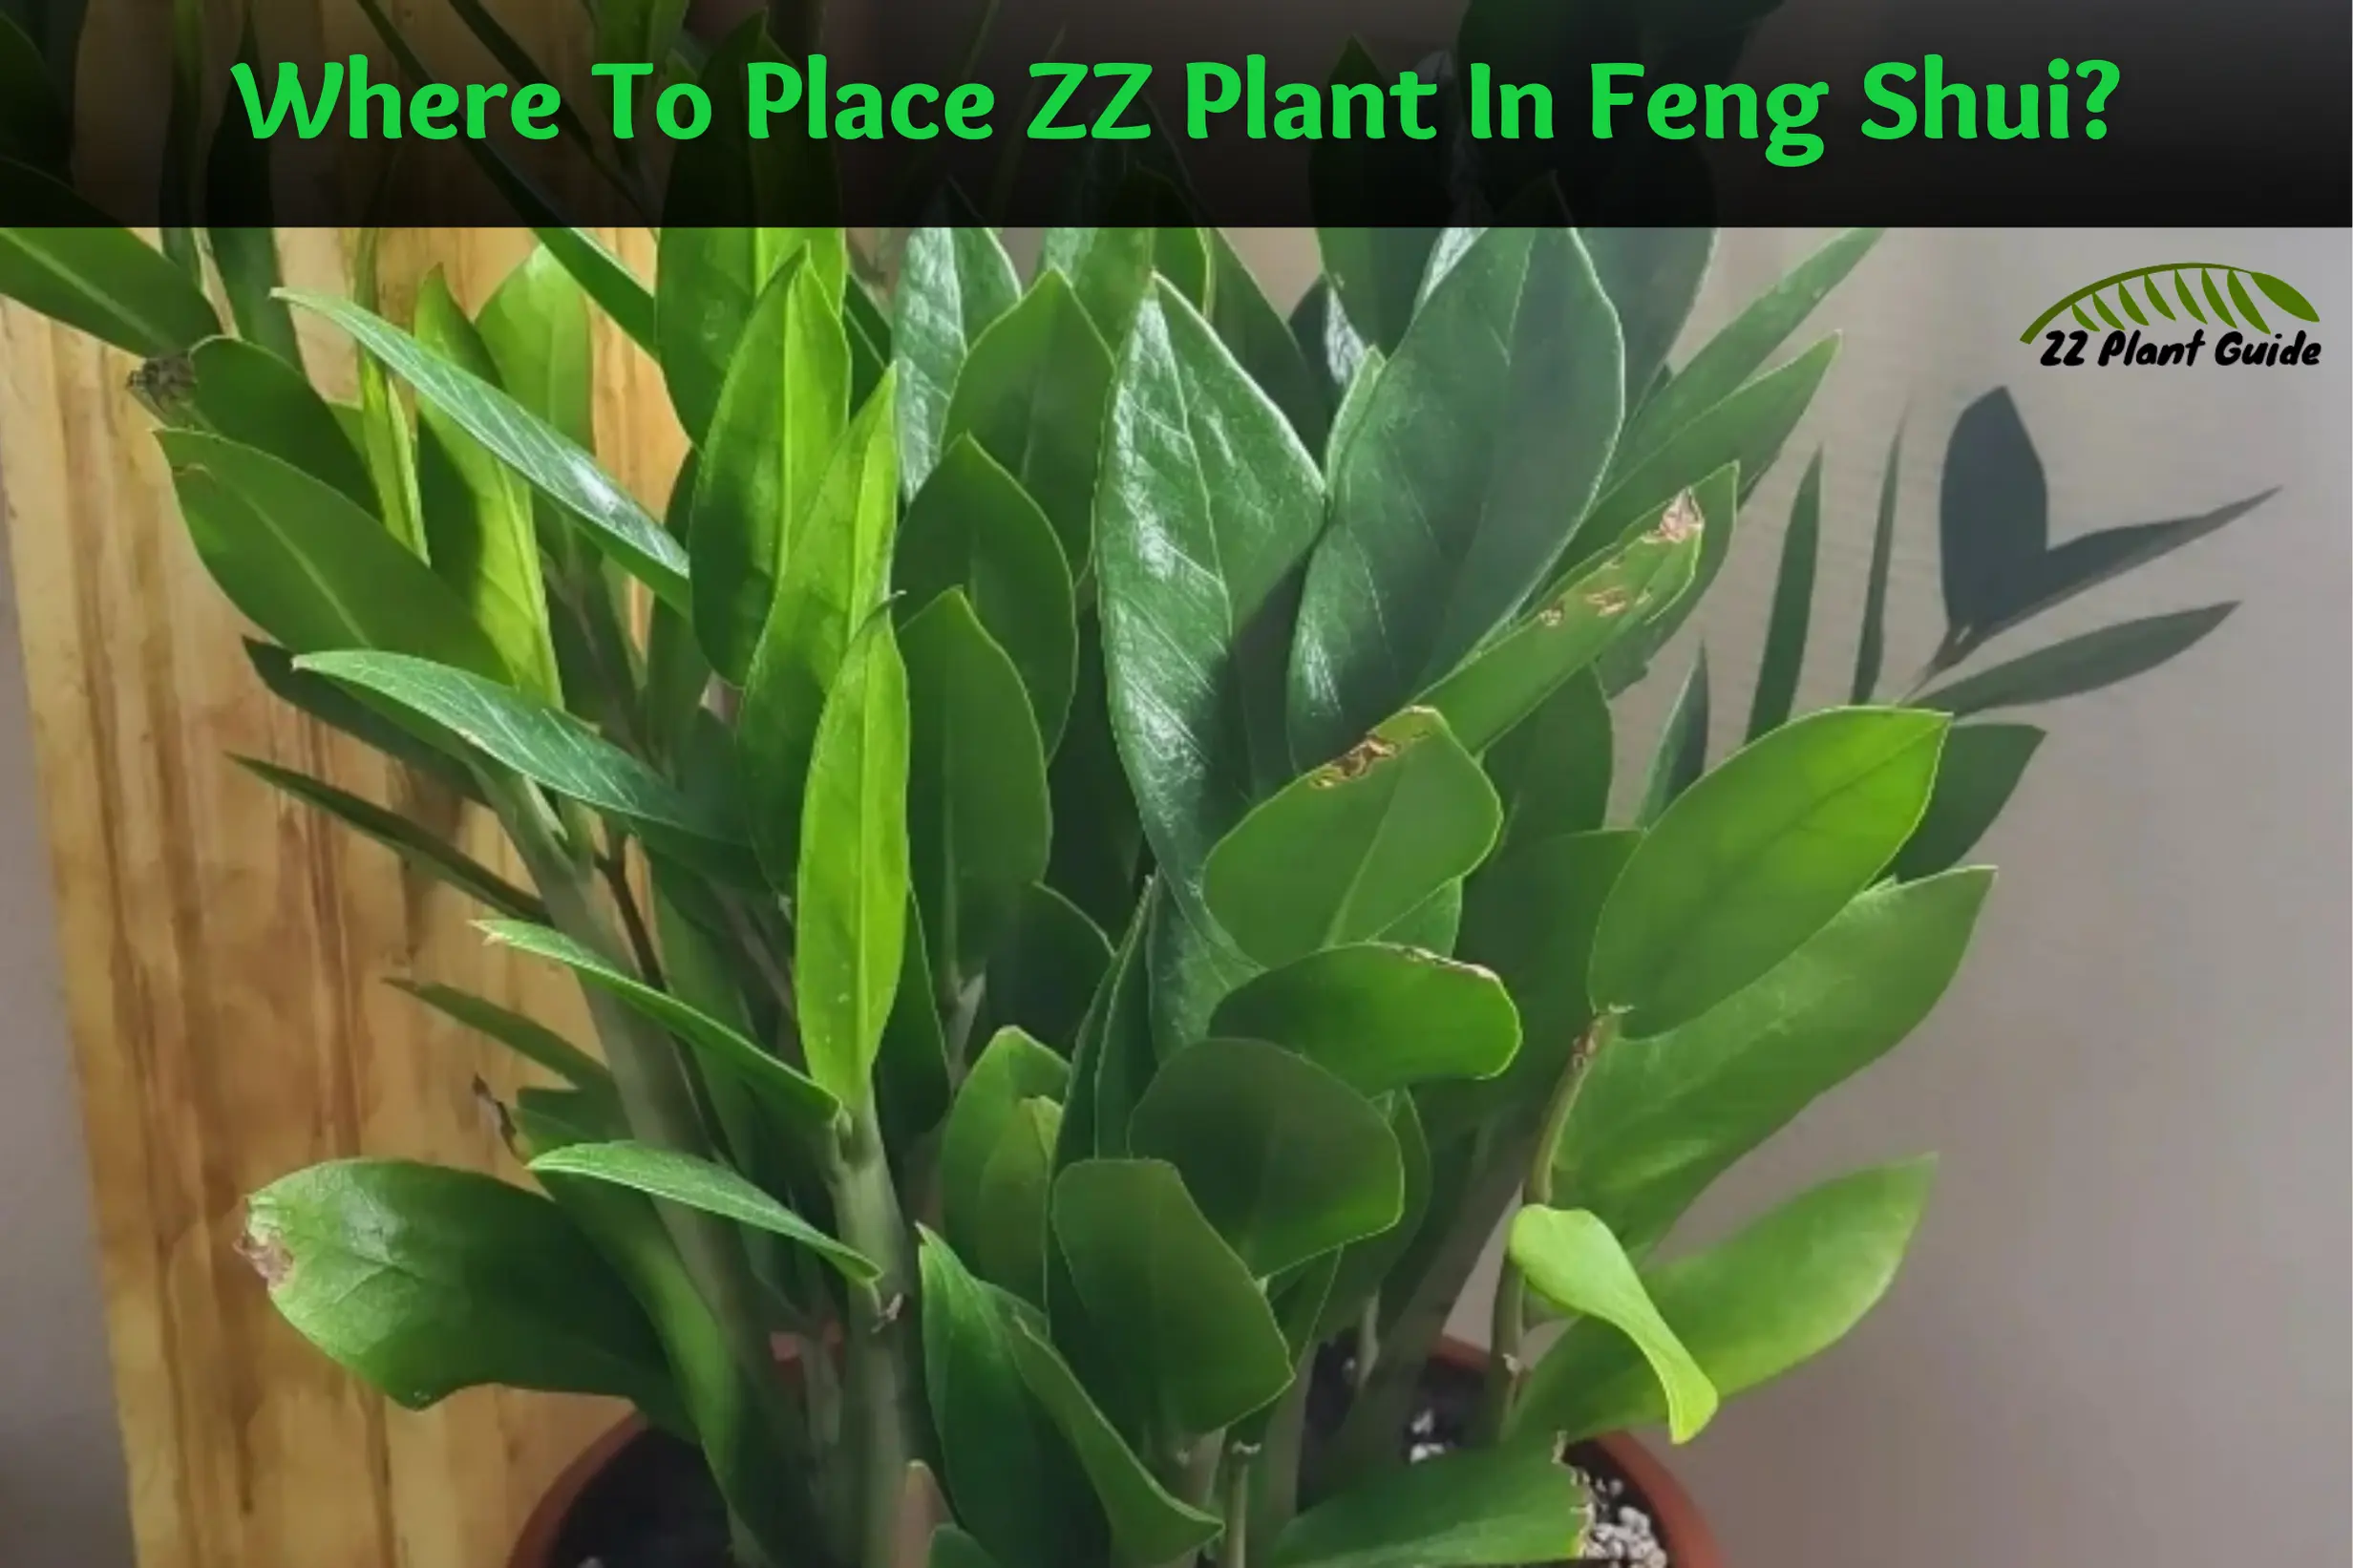 Where To Place ZZ Plant In Feng Shui A Guide